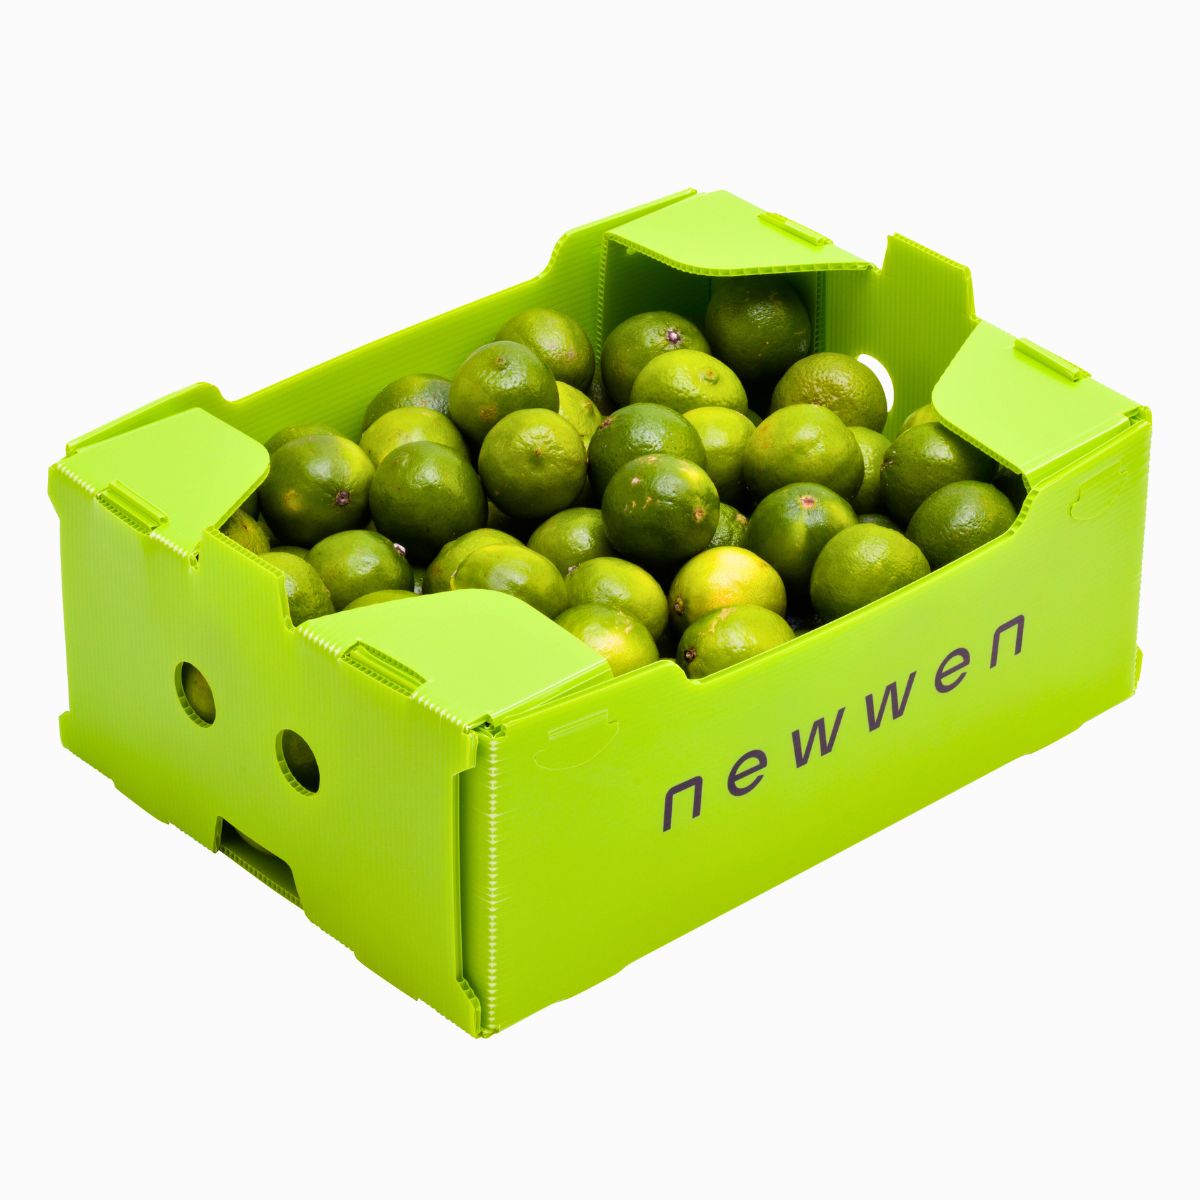 Newwen's sustainable boxes